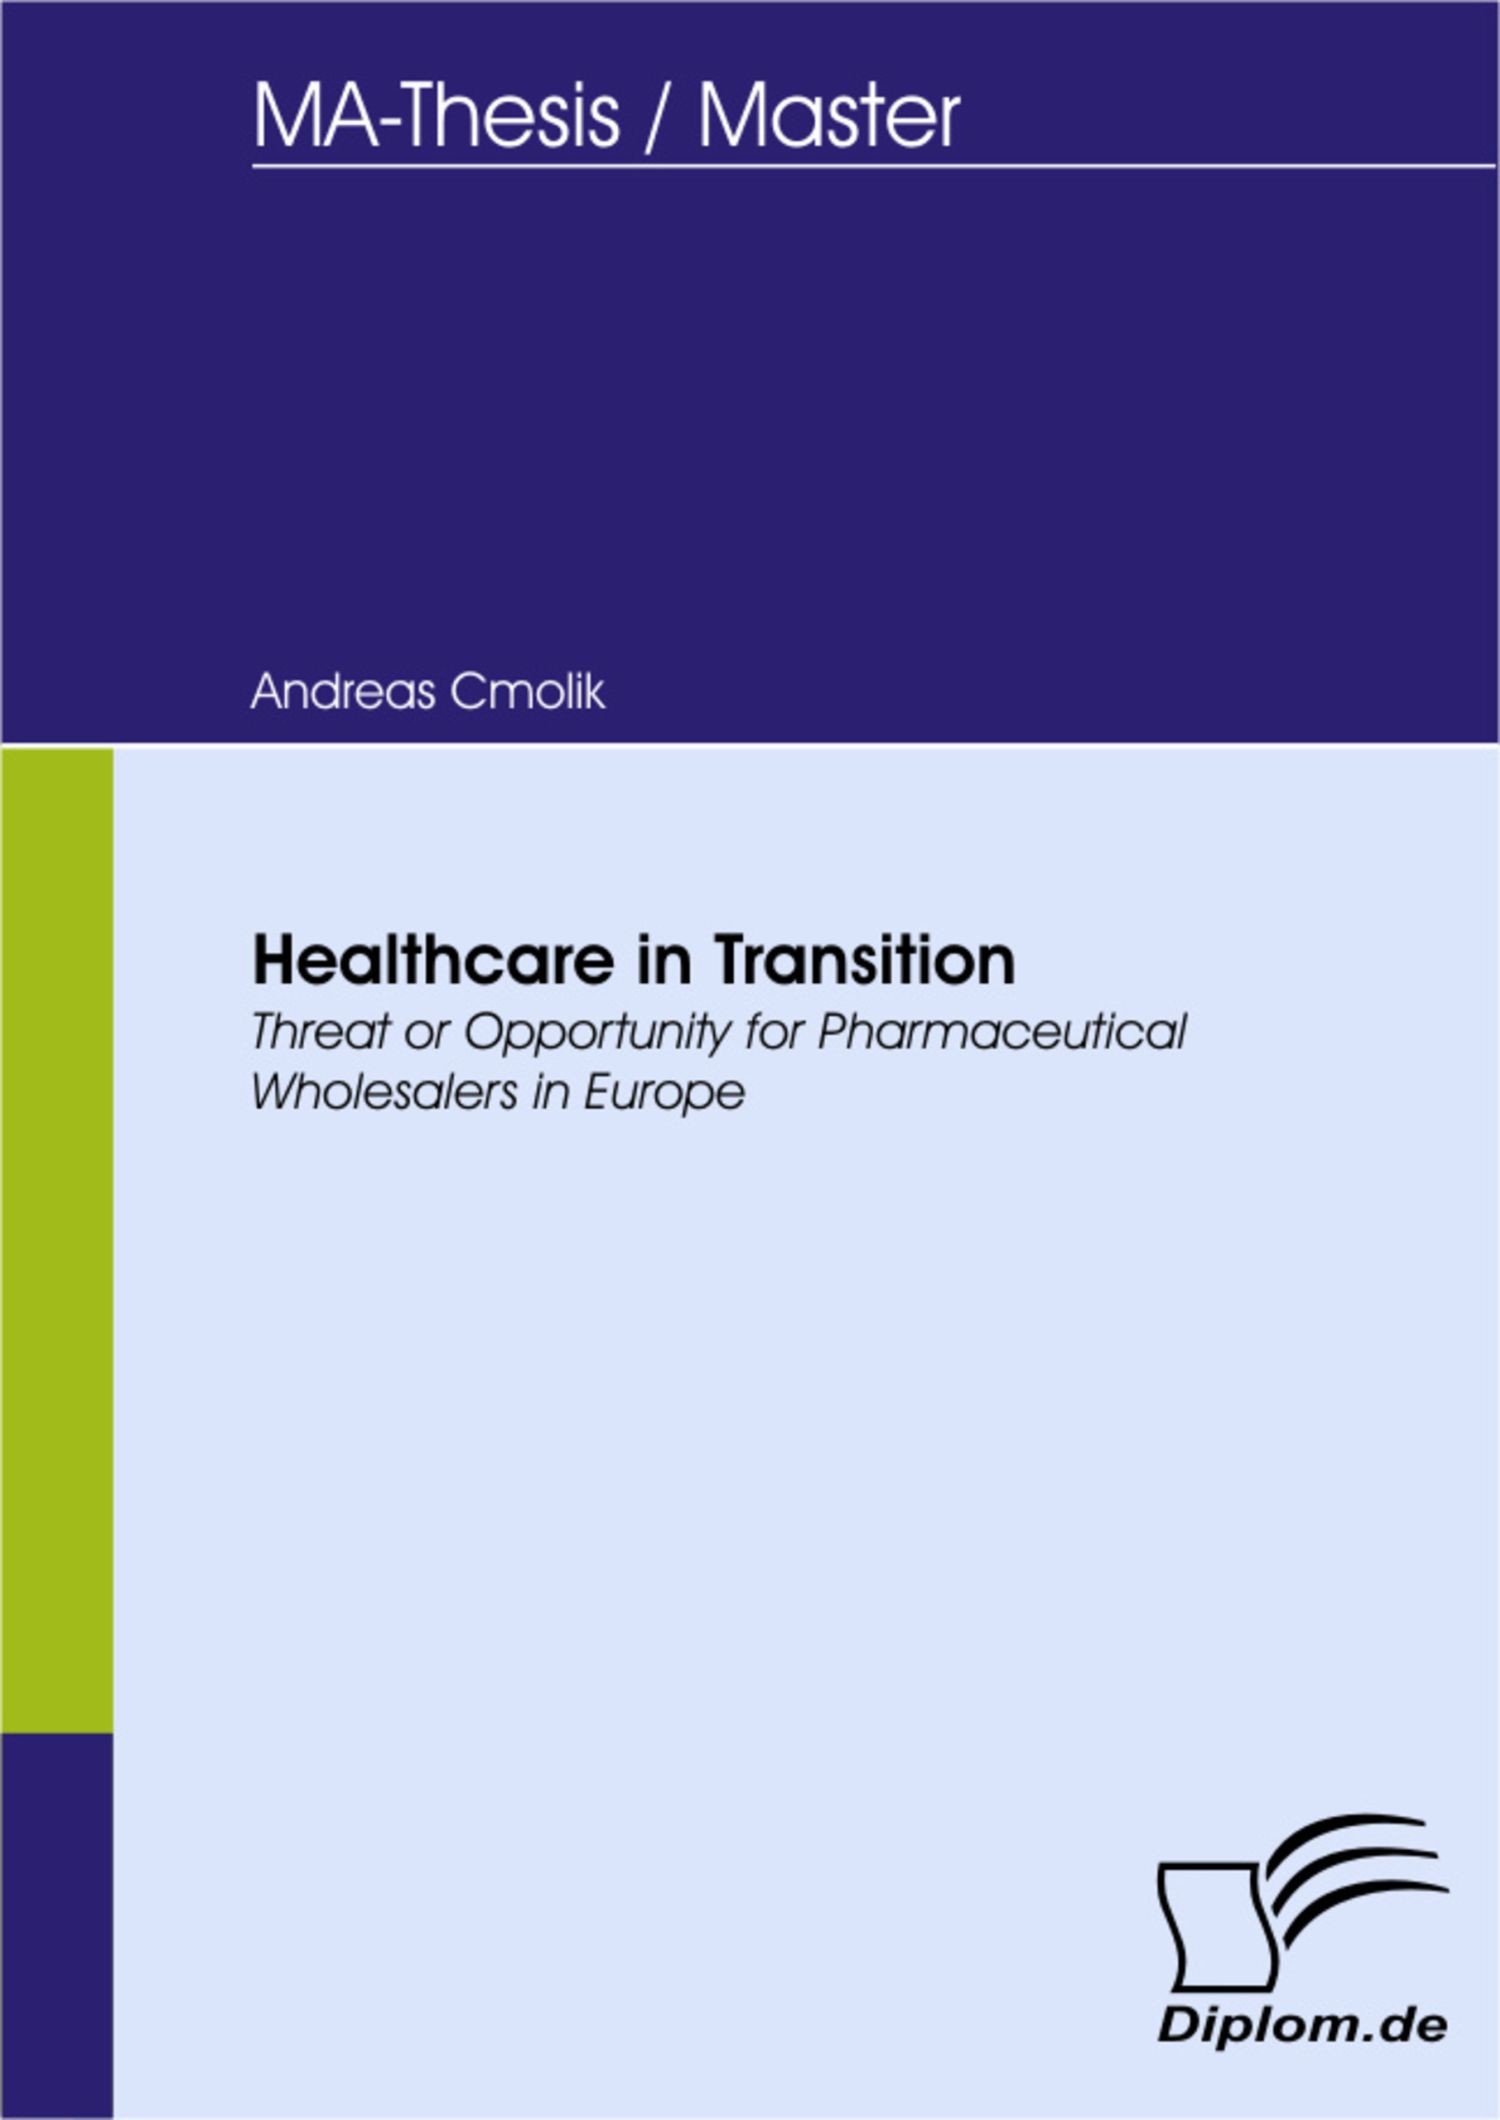 Healthcare in Transition:Threat or Opportunity for Pharmaceutical Wholesalers in Europe